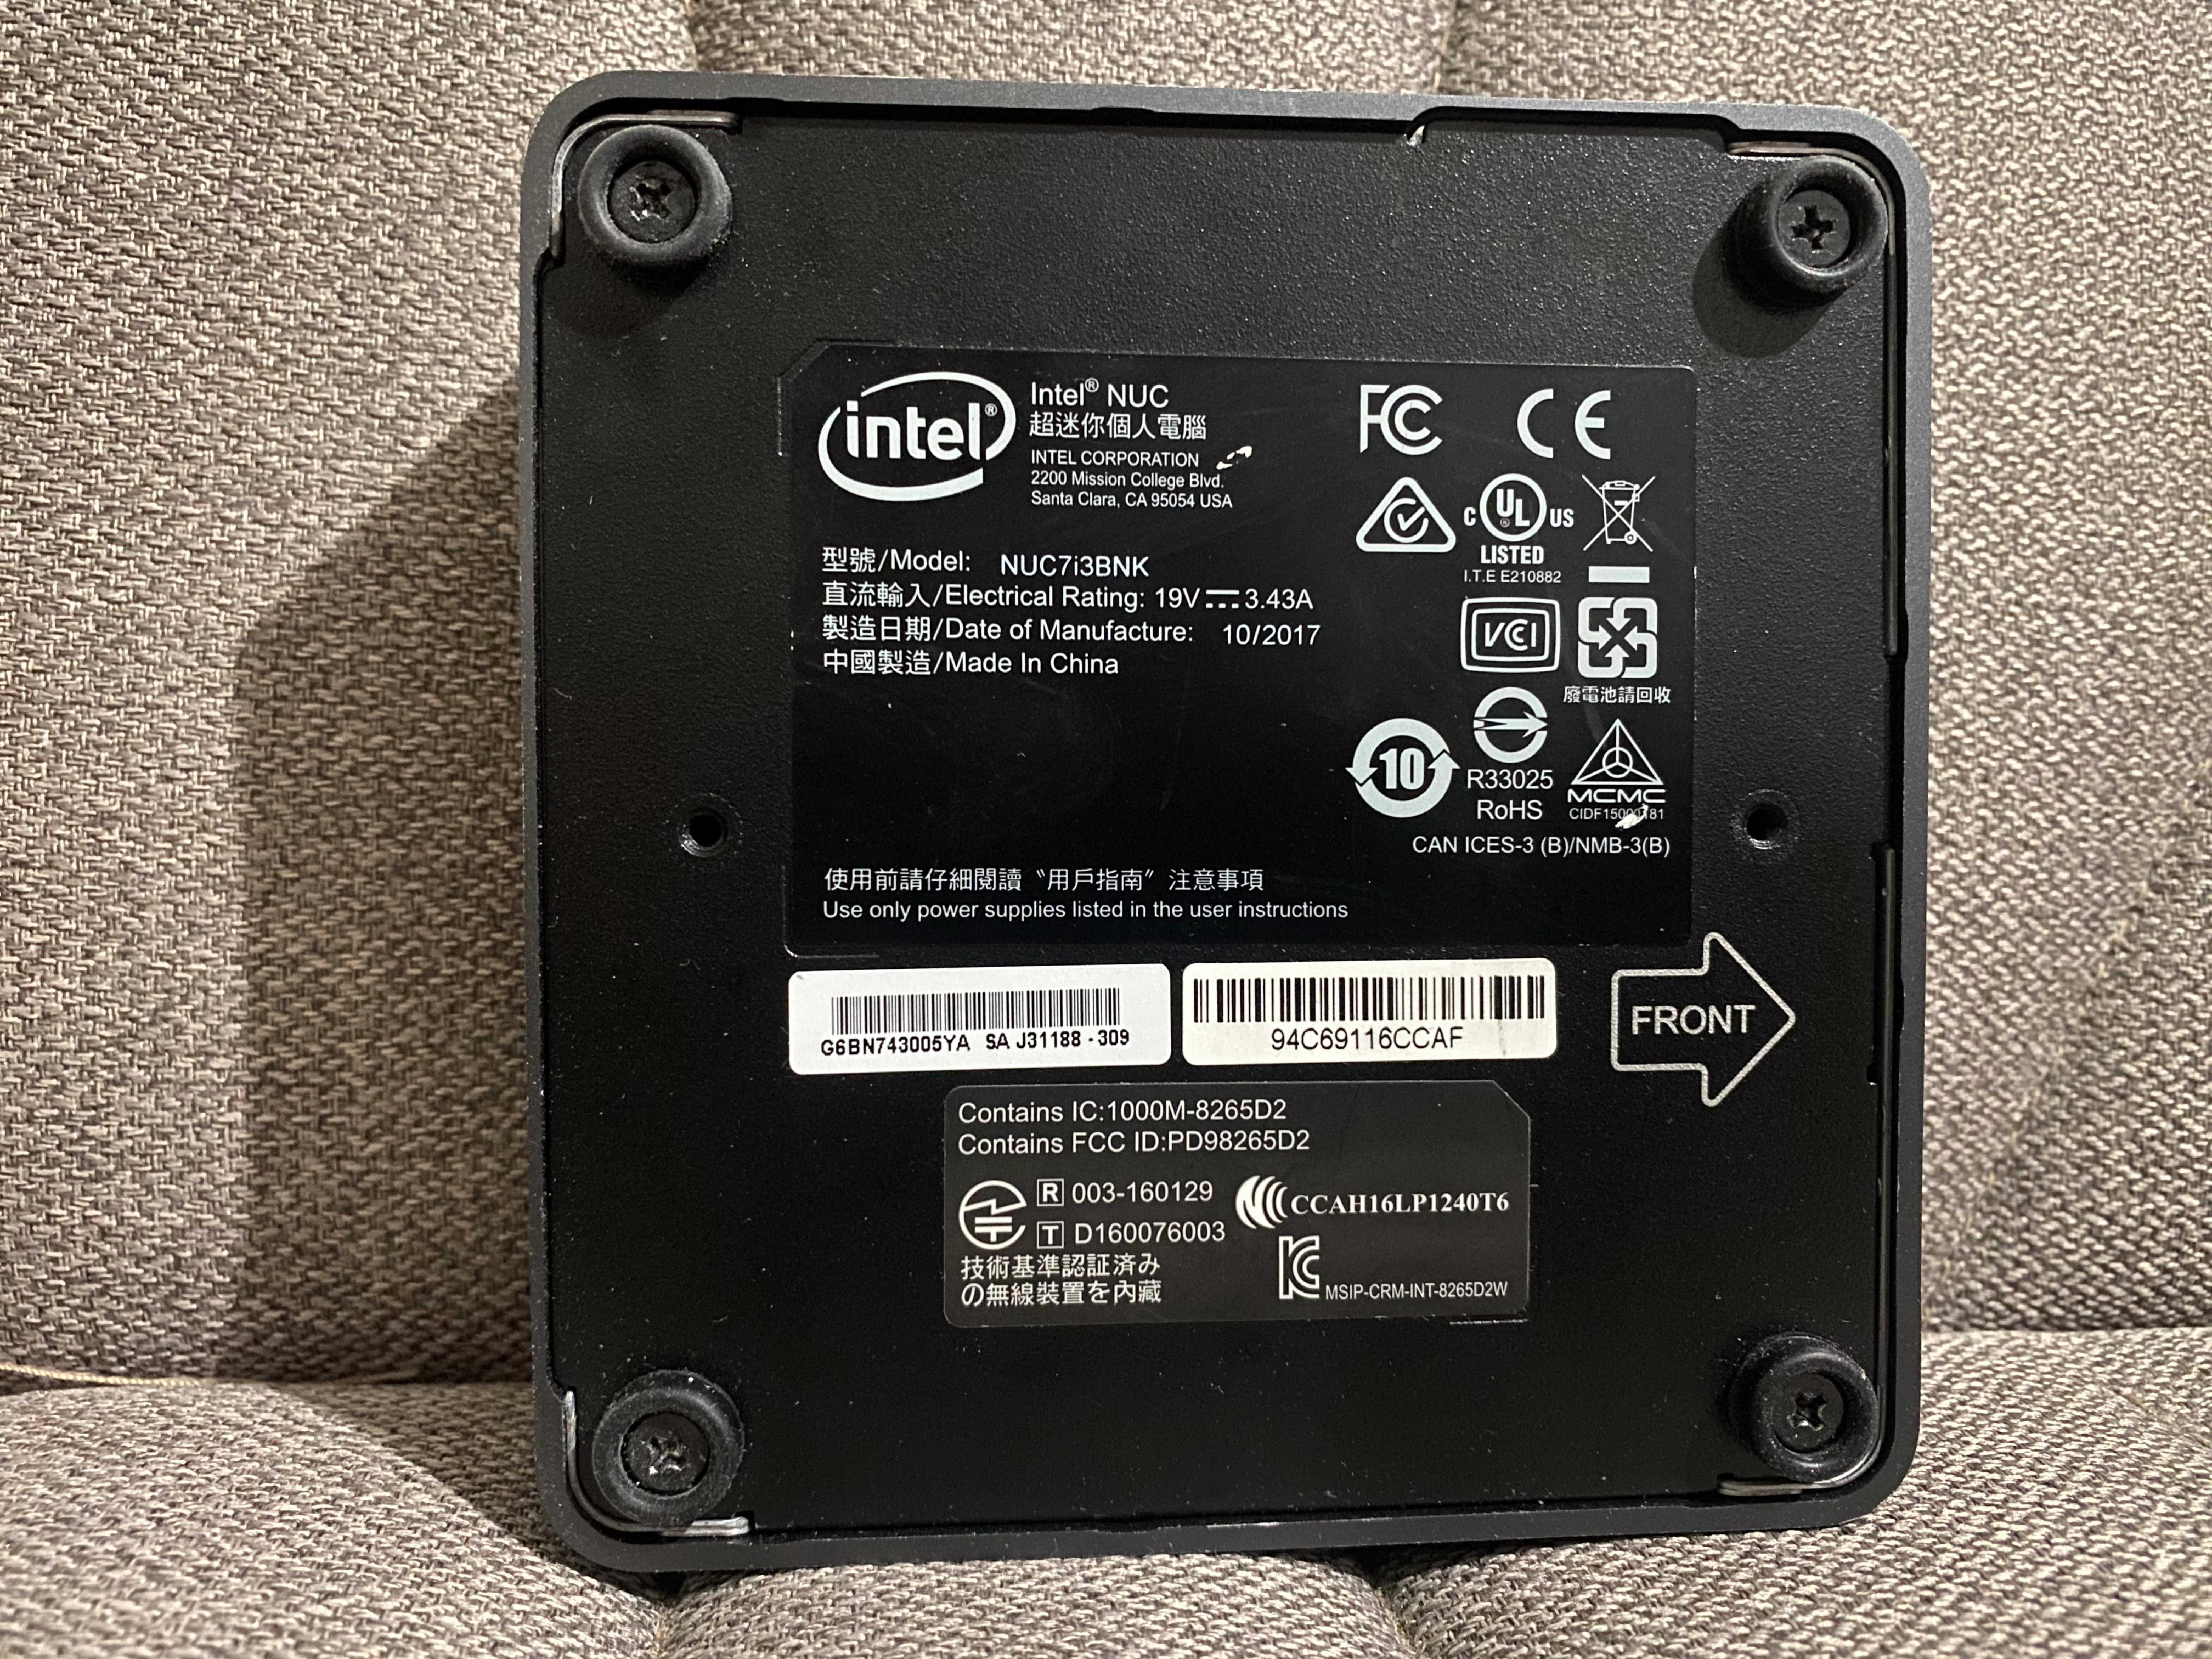 Pachet Intel NUC si statie andocare Dell